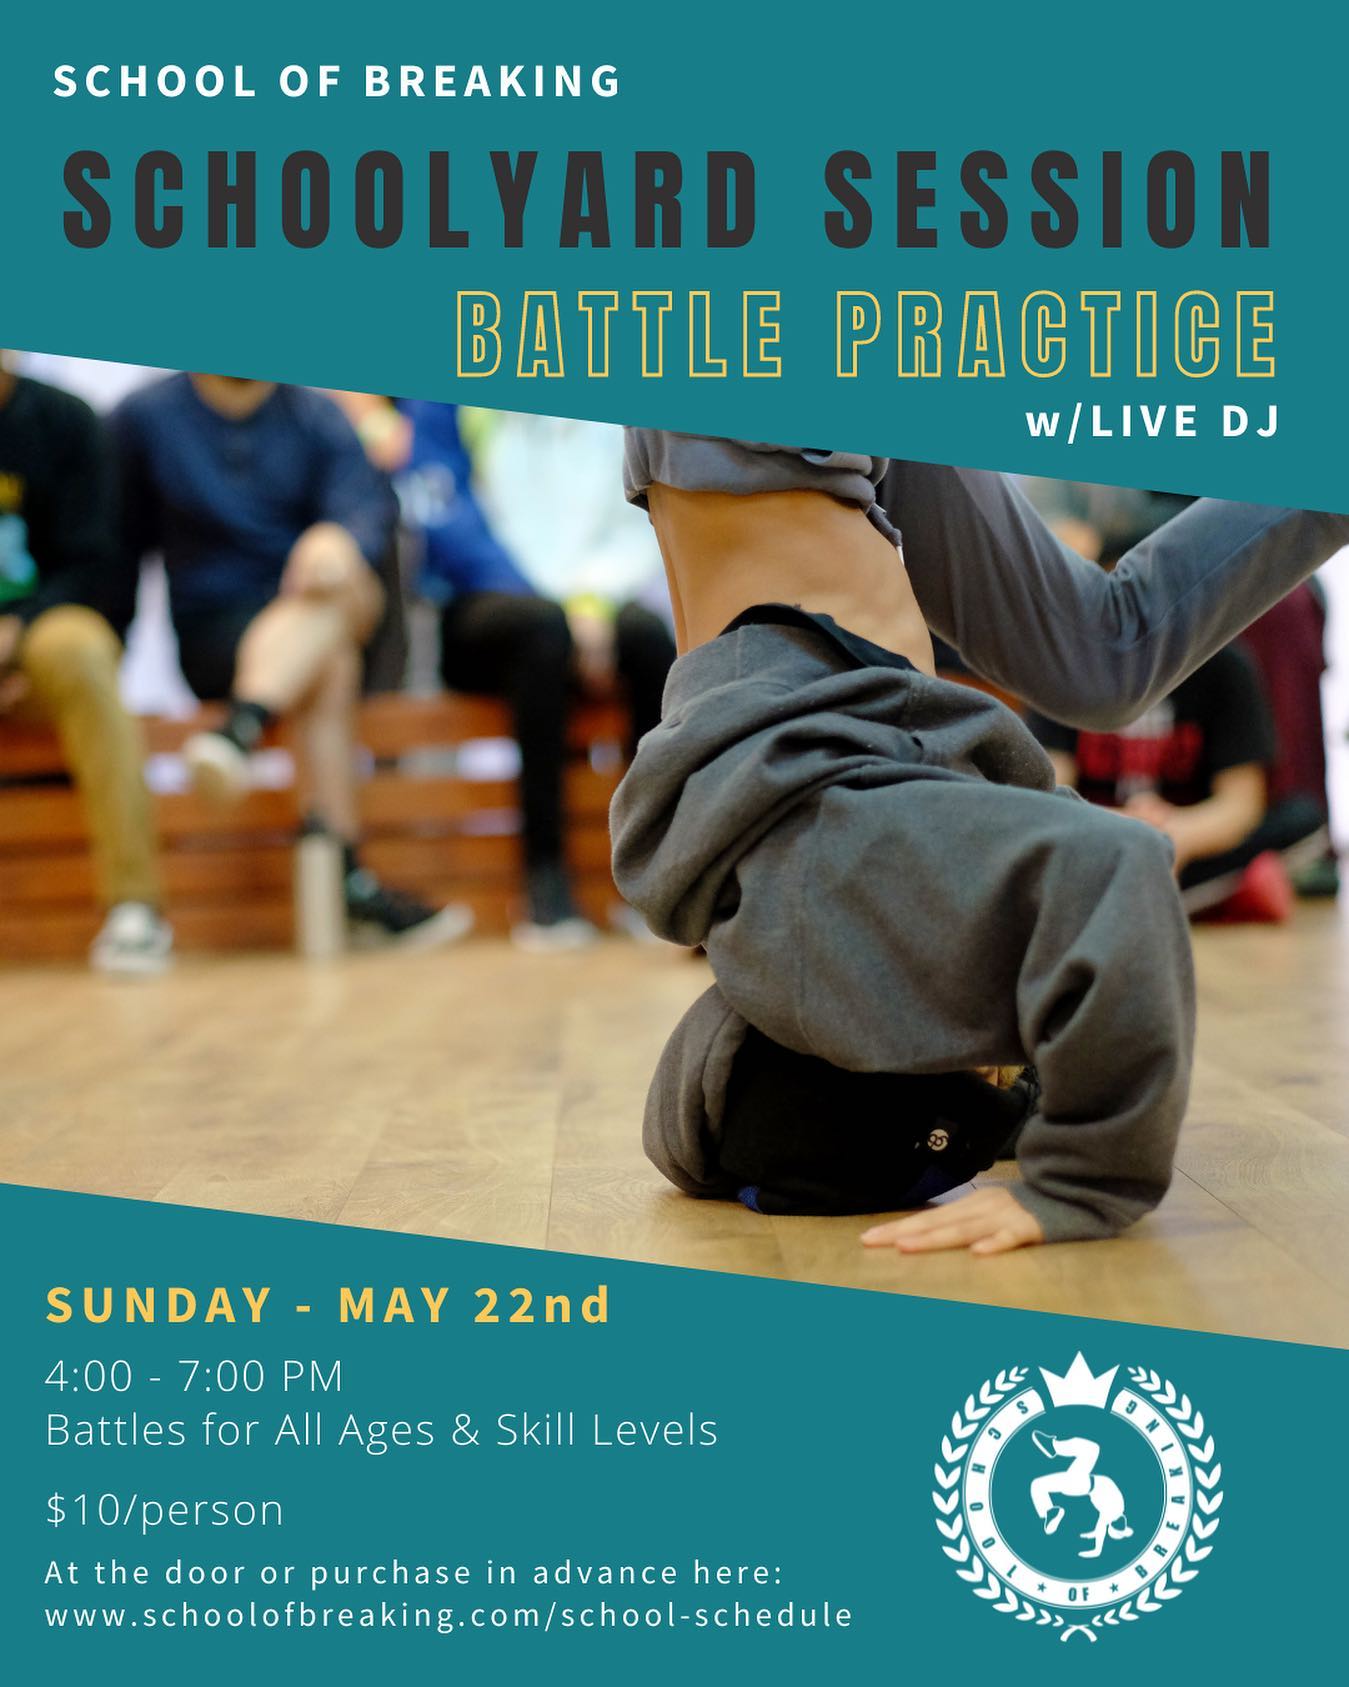 🚨SAVE THE DATE🚨 
On Sunday, May 22nd we will be hosting a special edition of our SchoolYard Session: Battle Practice 😈🔥

Come join us and catch some rounds with DJ @_ace0ne rocking the 1’s and 2’s 🎶 The session is open to youth, teens, and adults of all experience levels! If you’ve been looking to tap into battling, get more experience, or just sharpen your skills, don’t miss it. 💪✌️💯

💥Youth 1 vs 1 Breaking
💥Teens 1 vs 1 Breaking
💥Adult 1 vs 1 Breaking
🏆Cash prize for the winner of each category!

Link in bio to register 📲

#schoolofbreaking #battle #practice #schoolyard #session #breakin #HipHop #culture #bboy #bgirl #toprock #footwork #freeze #powermoves #bboylifestyle #bgirllifestyle #expressfreely #dance #breakdance #breakdancebattle